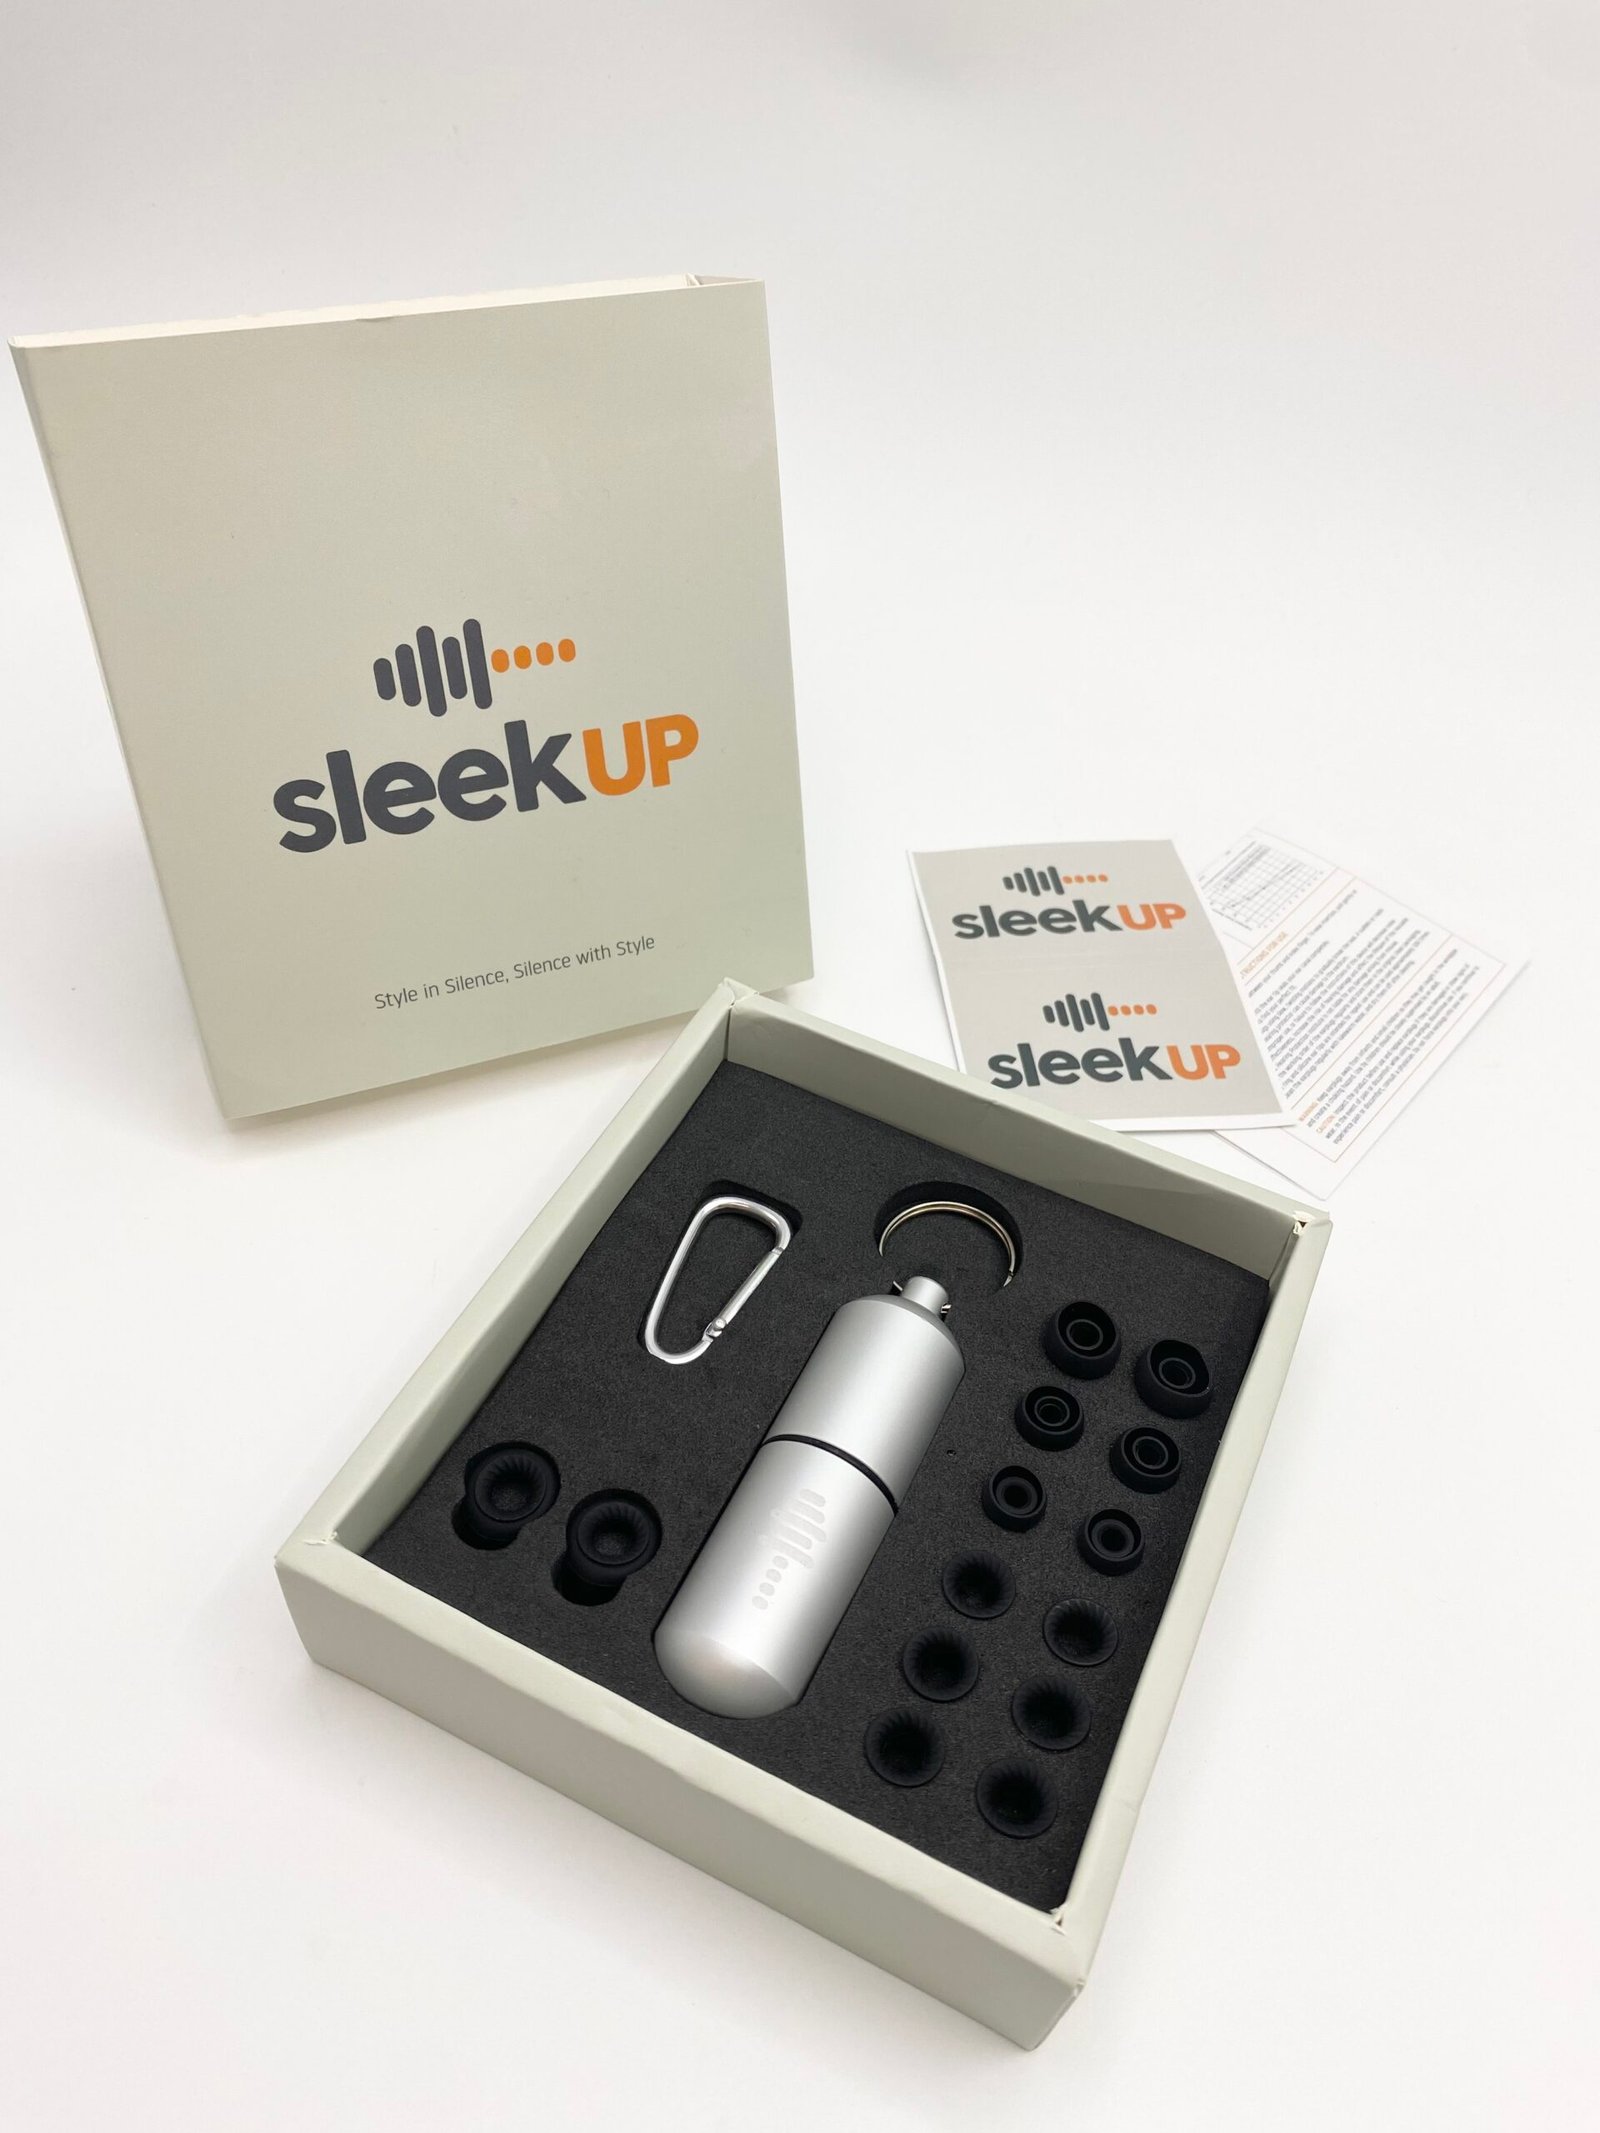 Discover the complete Sleekup experience with our comprehensive earplugs kit! Inside, you'll find 4 pairs of ear cups (XS, S, M, L) and 4 pairs of filter inner rings for customizable noise reduction. Plus, our portable carrying case comes with an adapter for easy attachment, along with two stickers and a manual to enhance your journey to tranquility. Elevate your comfort and security with Sleekup